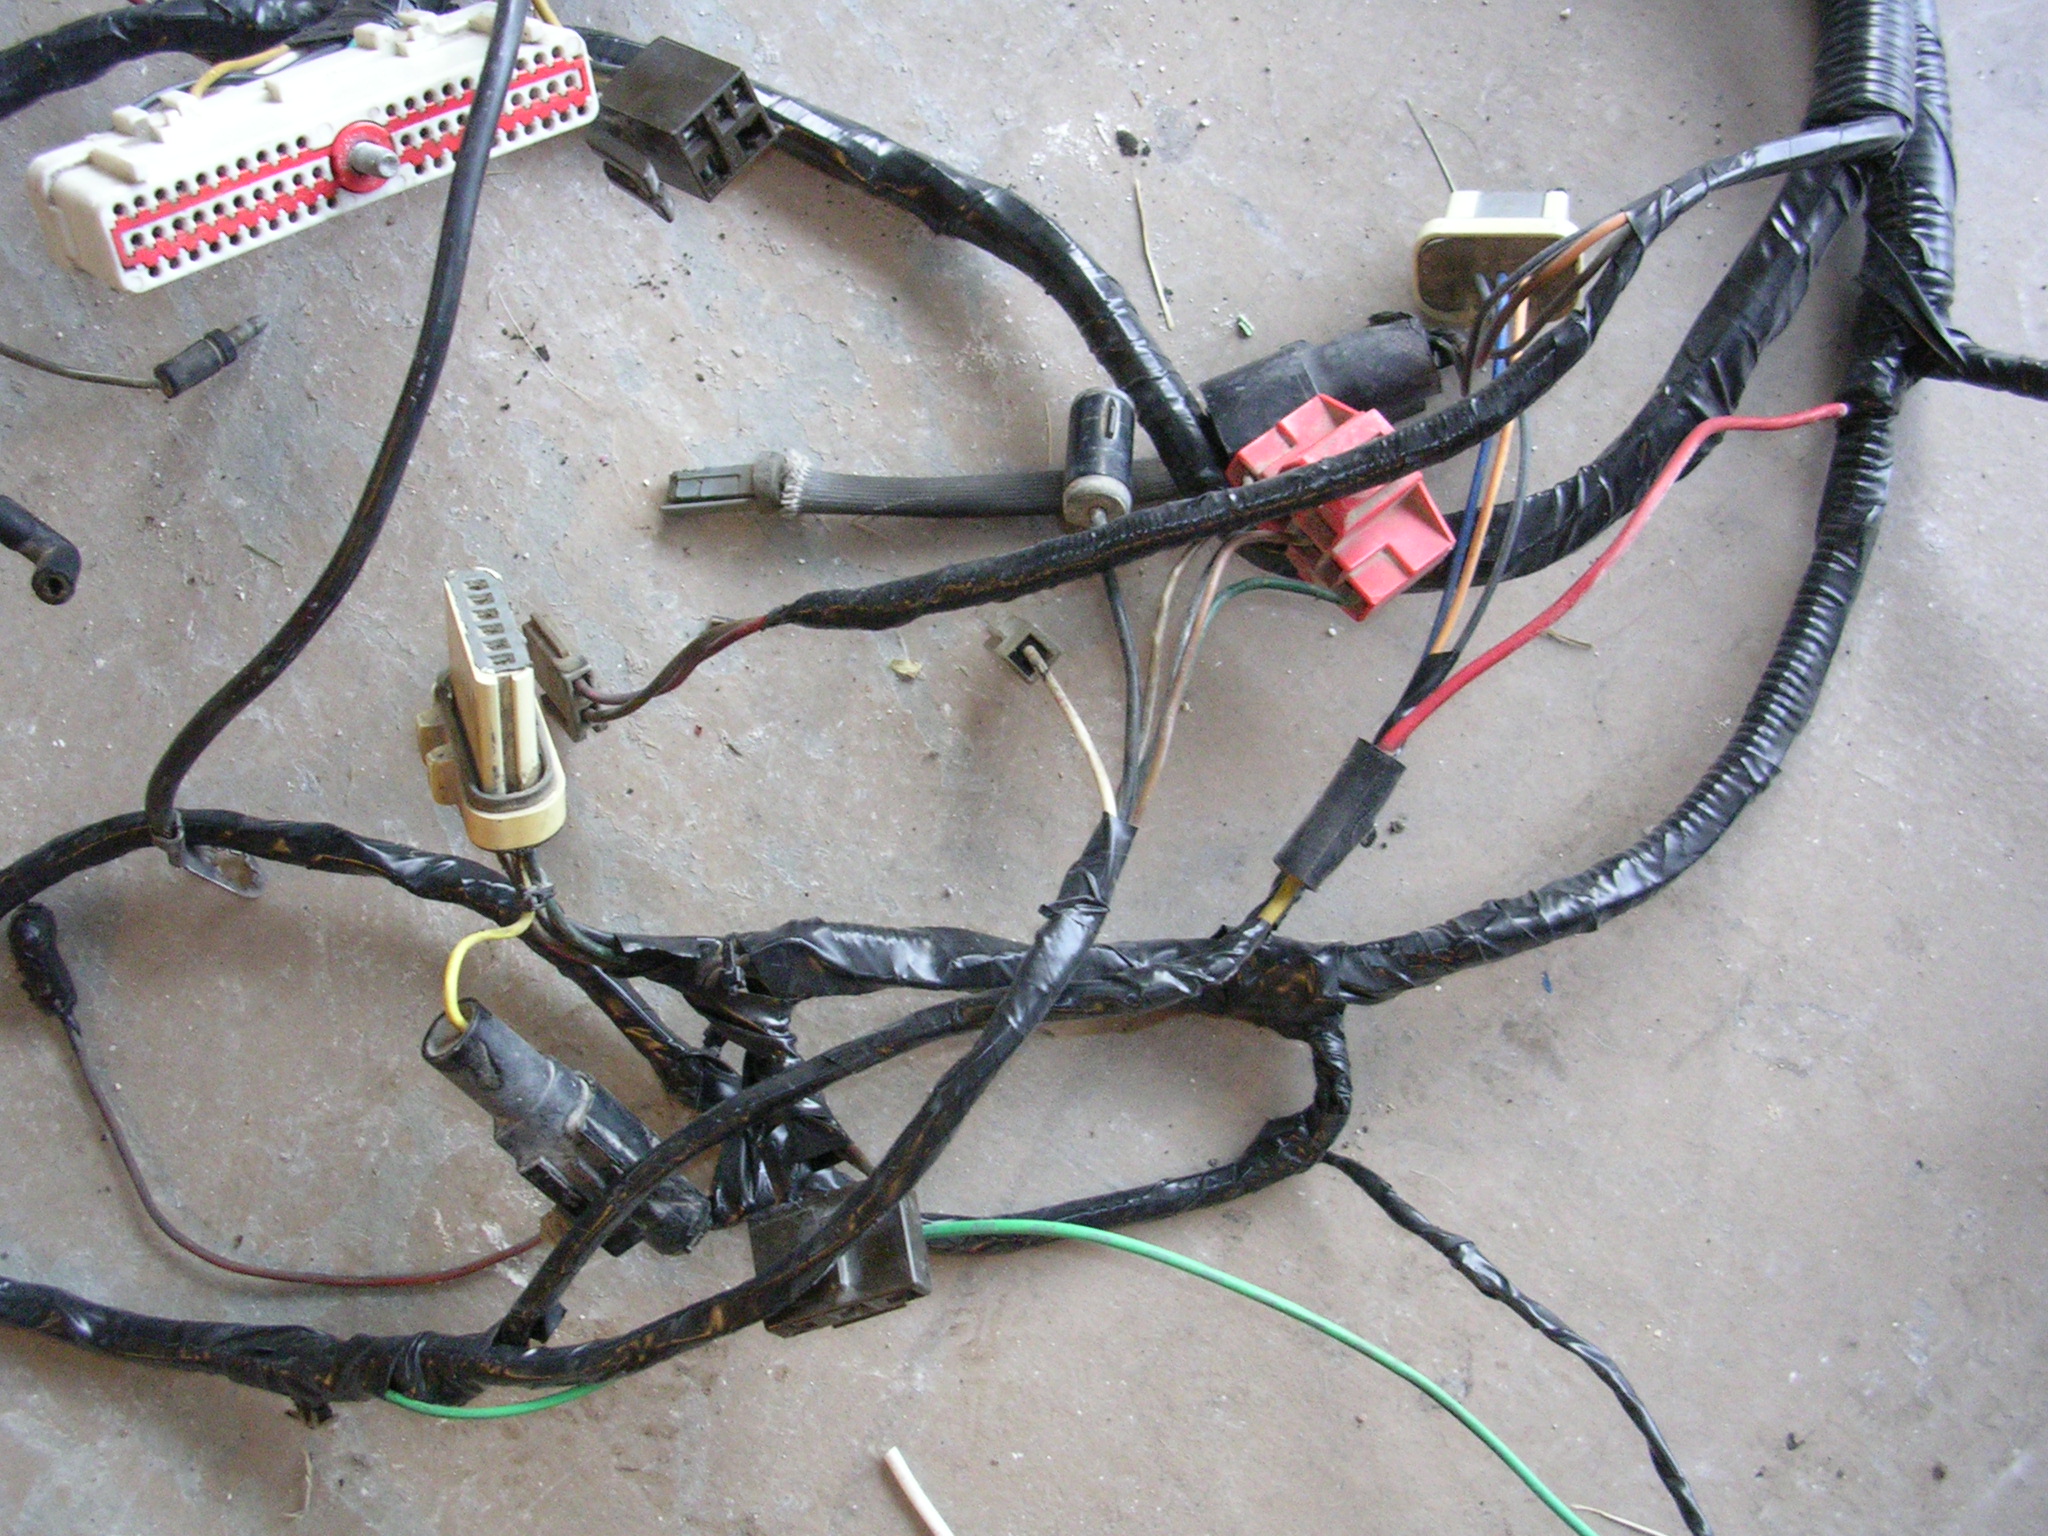 Early Fuel Injected Wiring Harness